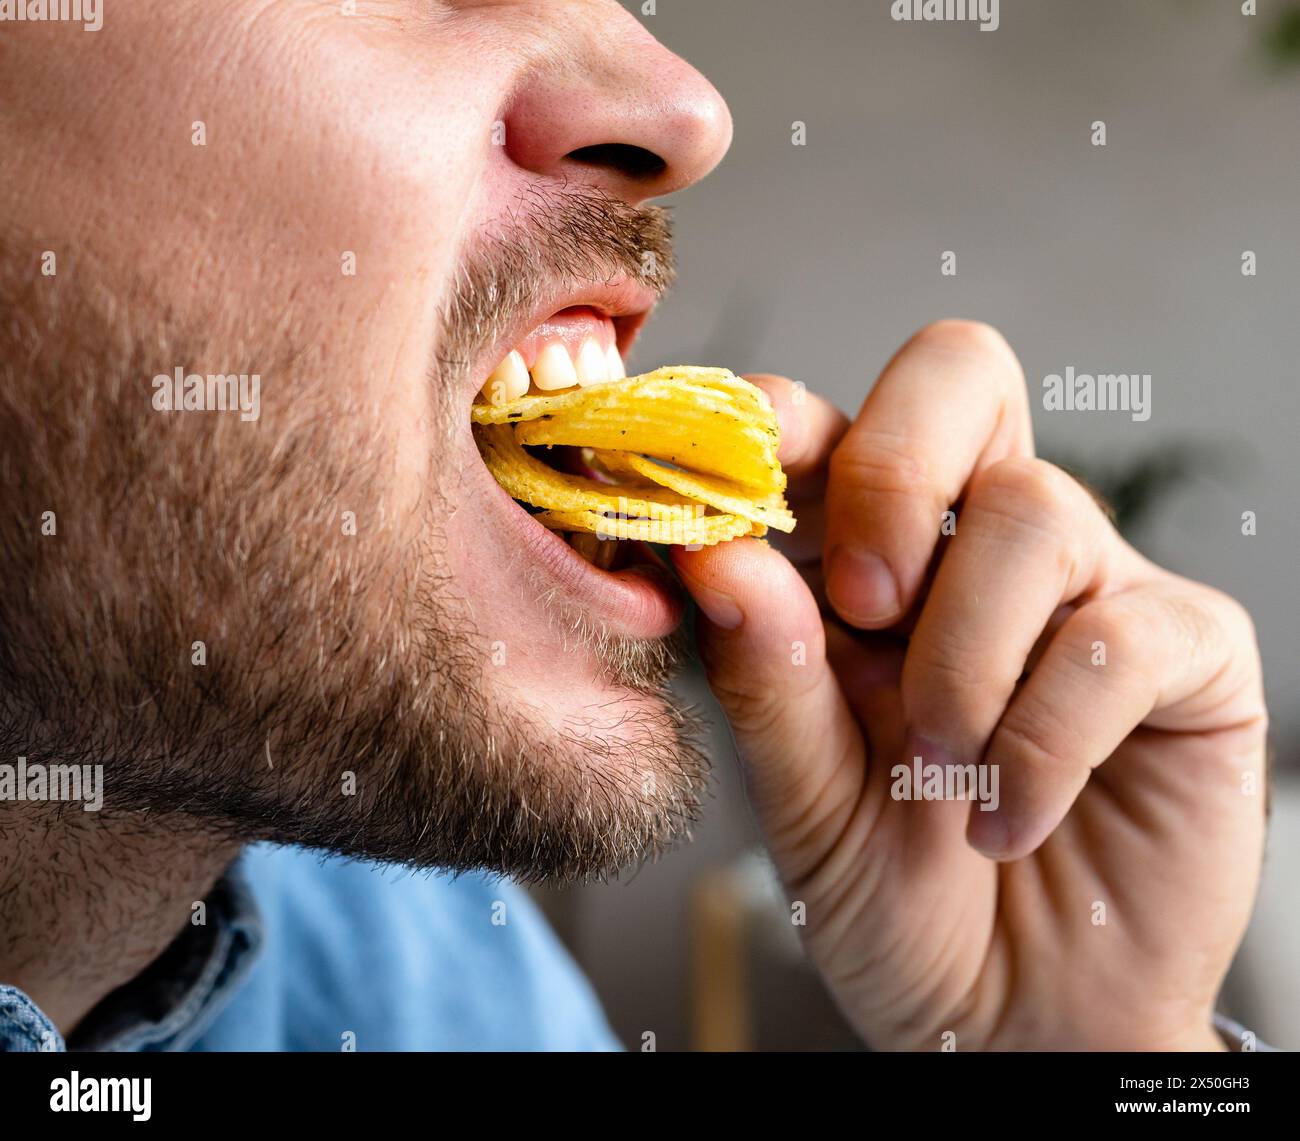 Man eats chips, closeup photo of the eating mouth. Unhealthy eating. Stock Photo